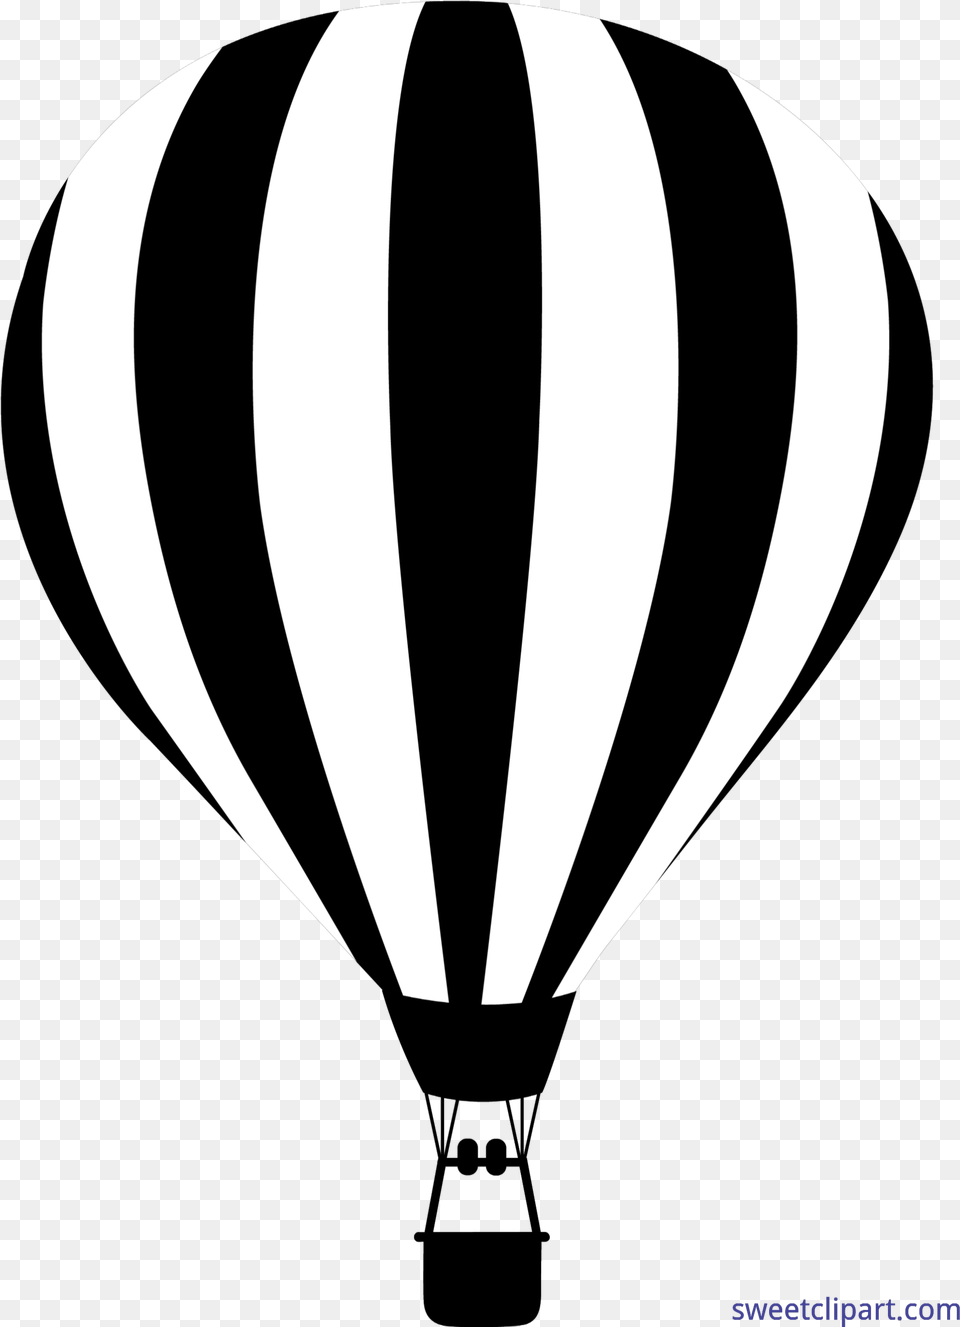 Hot Air Balloon Silhouette, Aircraft, Transportation, Vehicle, Blade Png